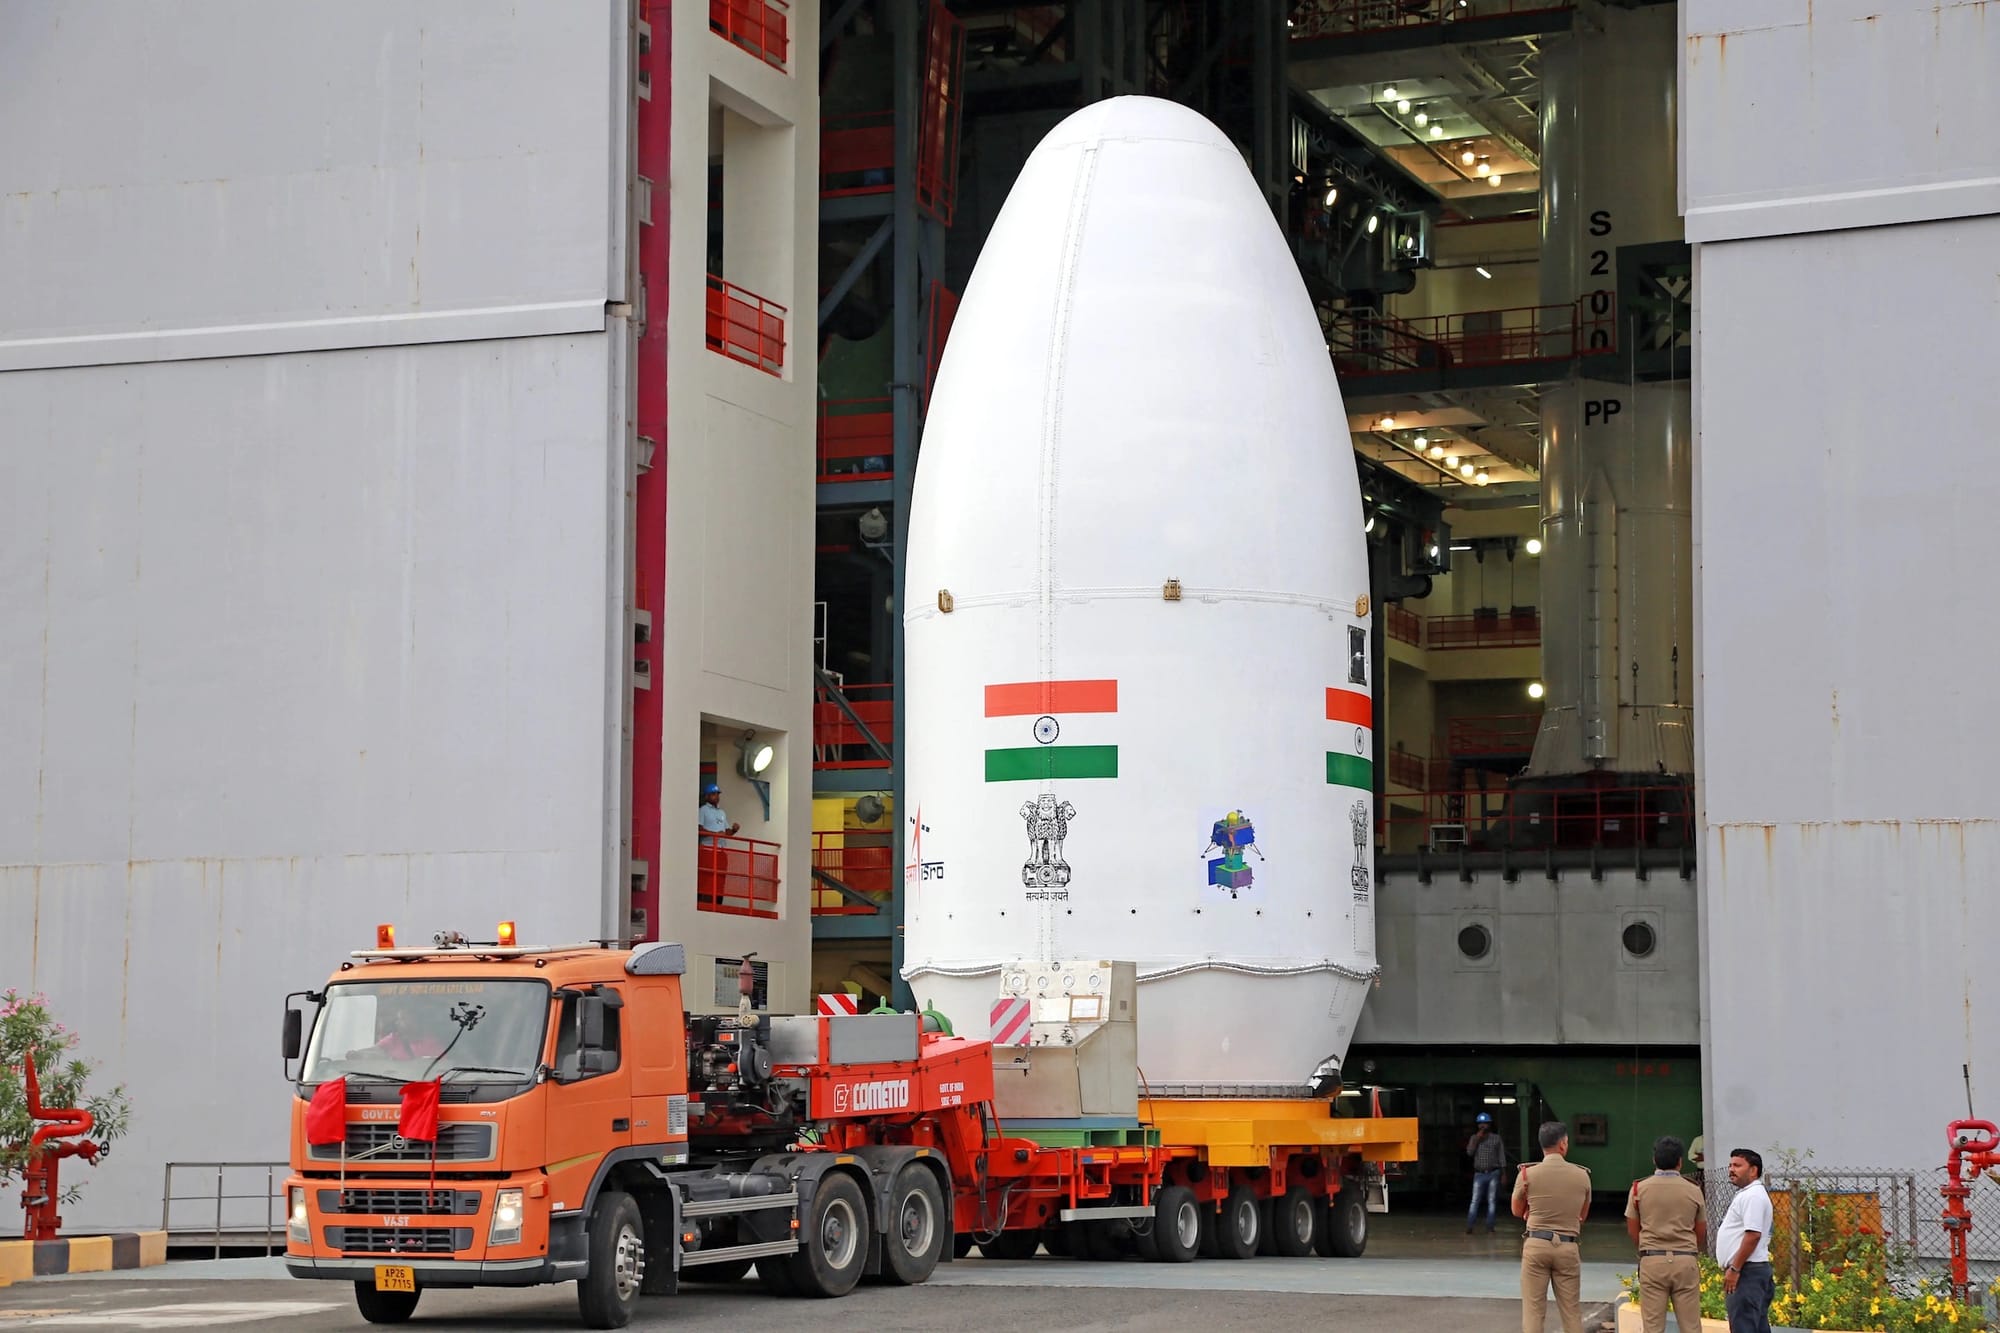 Indian Space Progress #18: A flat budget, increasing mass to orbit, continuing Chandrayaan, and pushes for private space